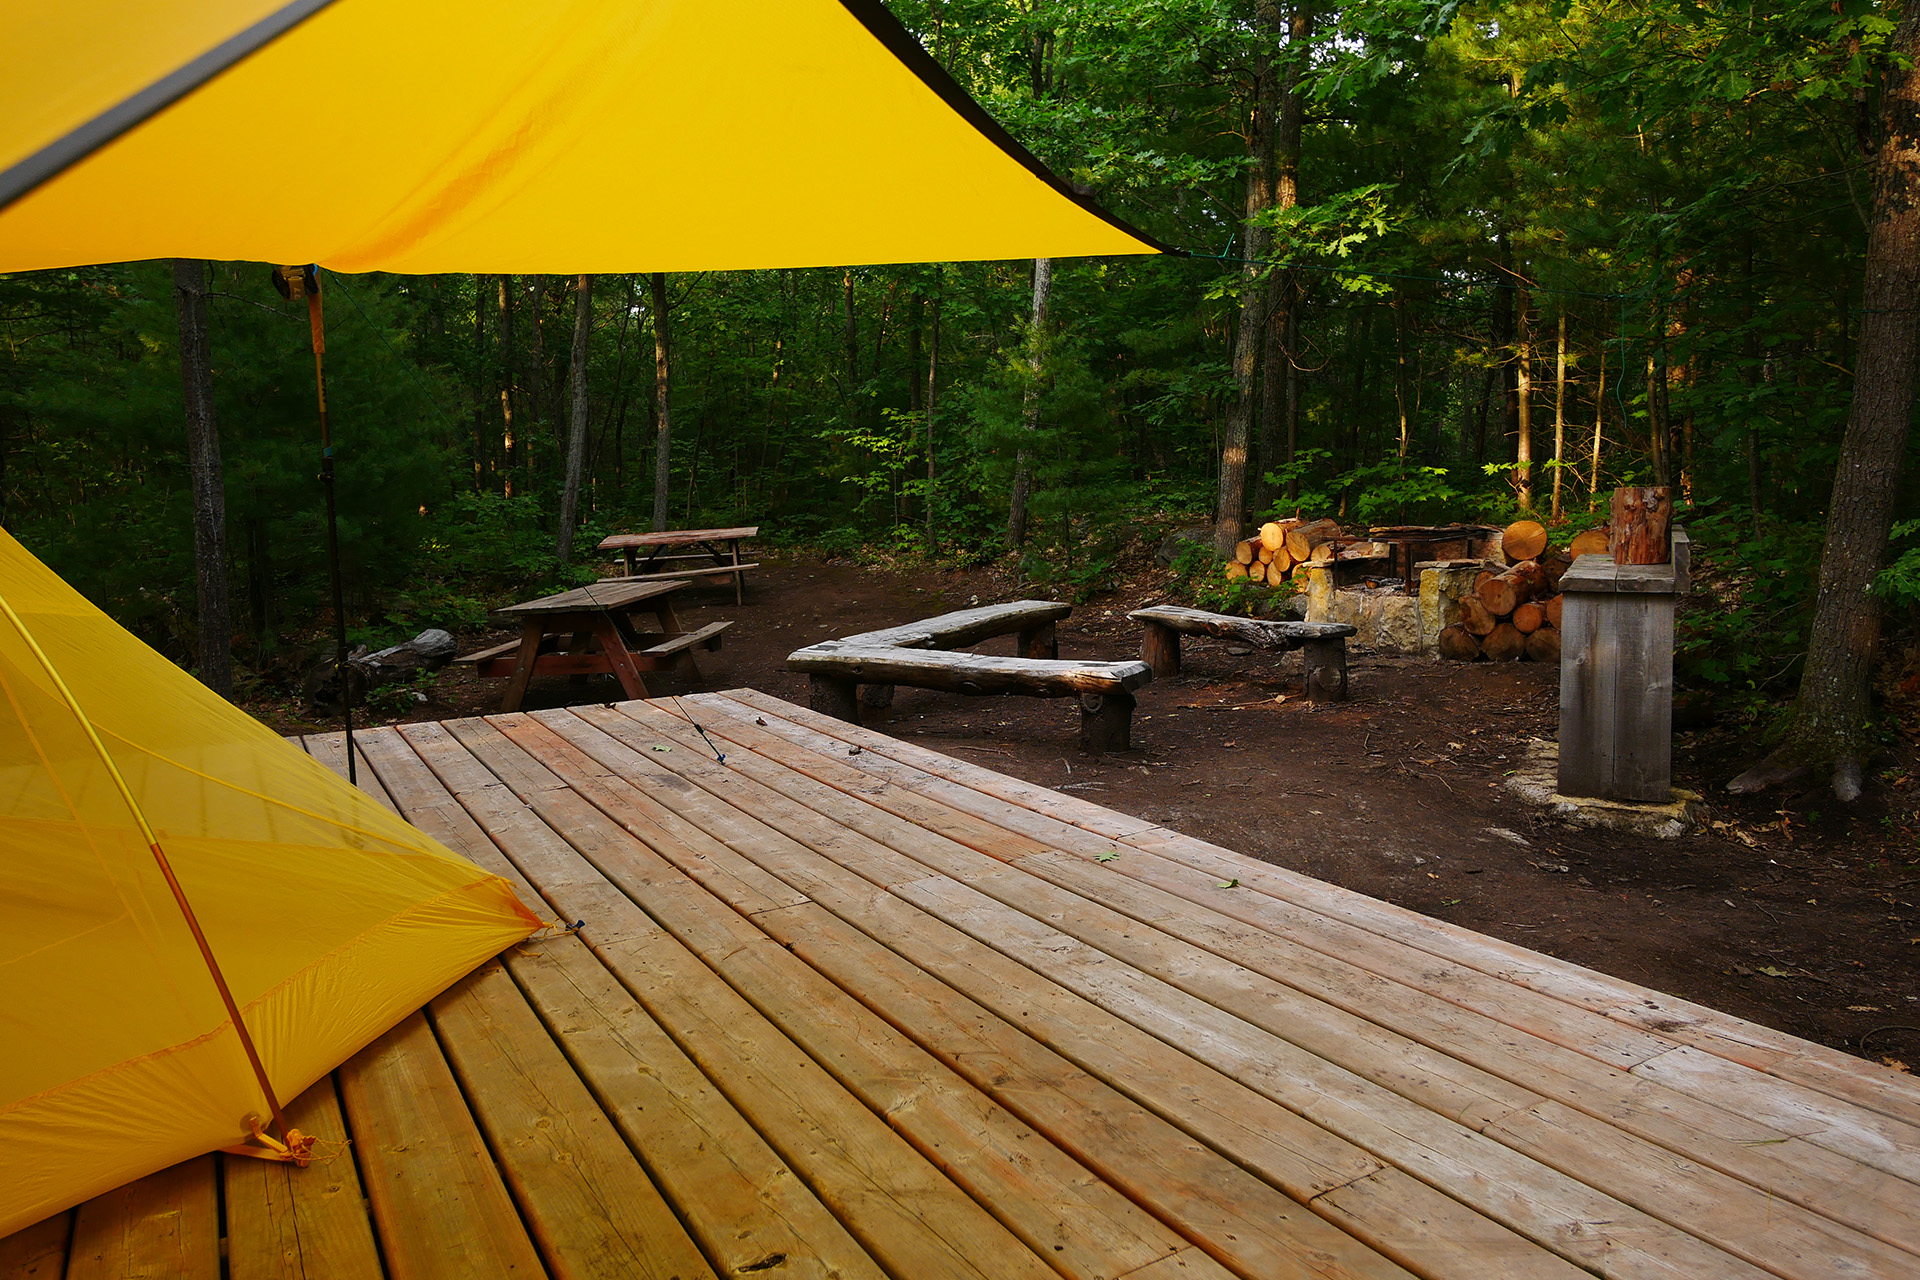 A wooden deck and yellow tent set among a clearing of trees in Point Grondine Park.